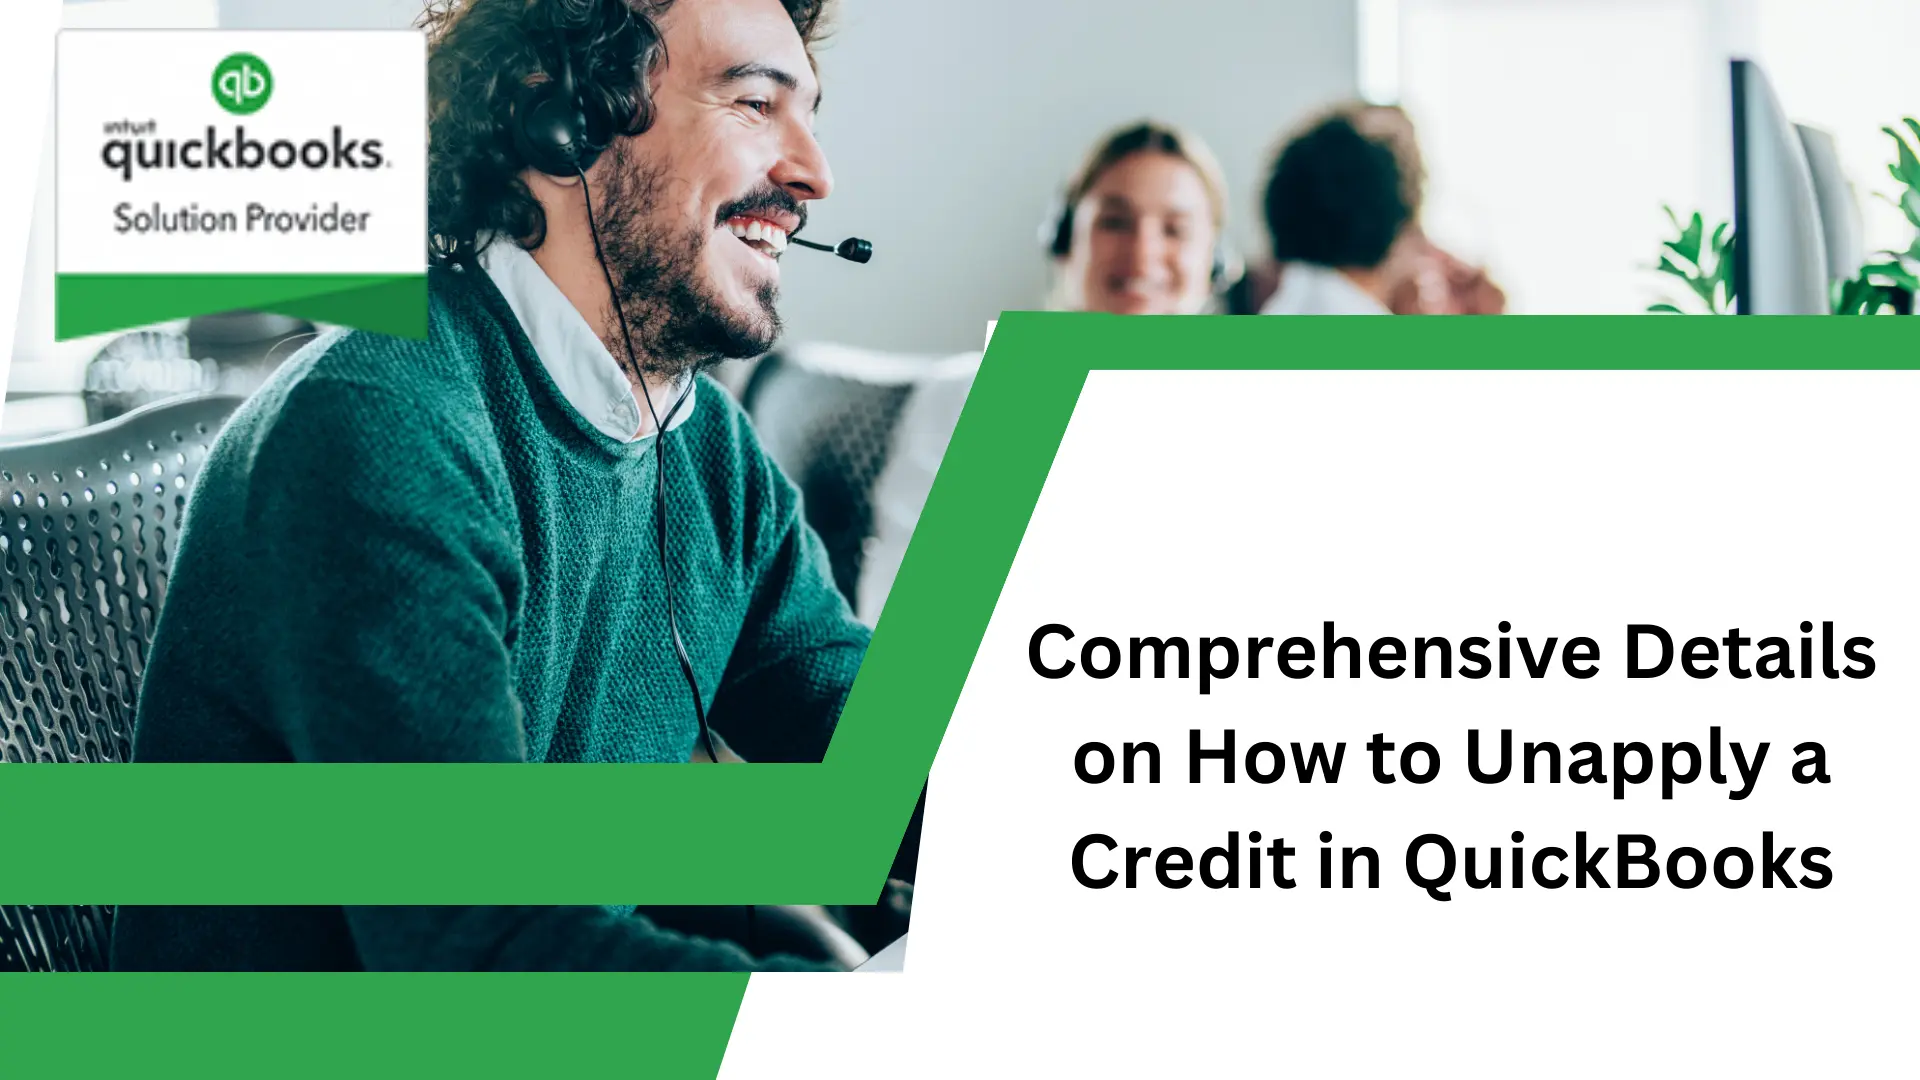 Comprehensive Details on How to Unapply a Credit in QuickBooks